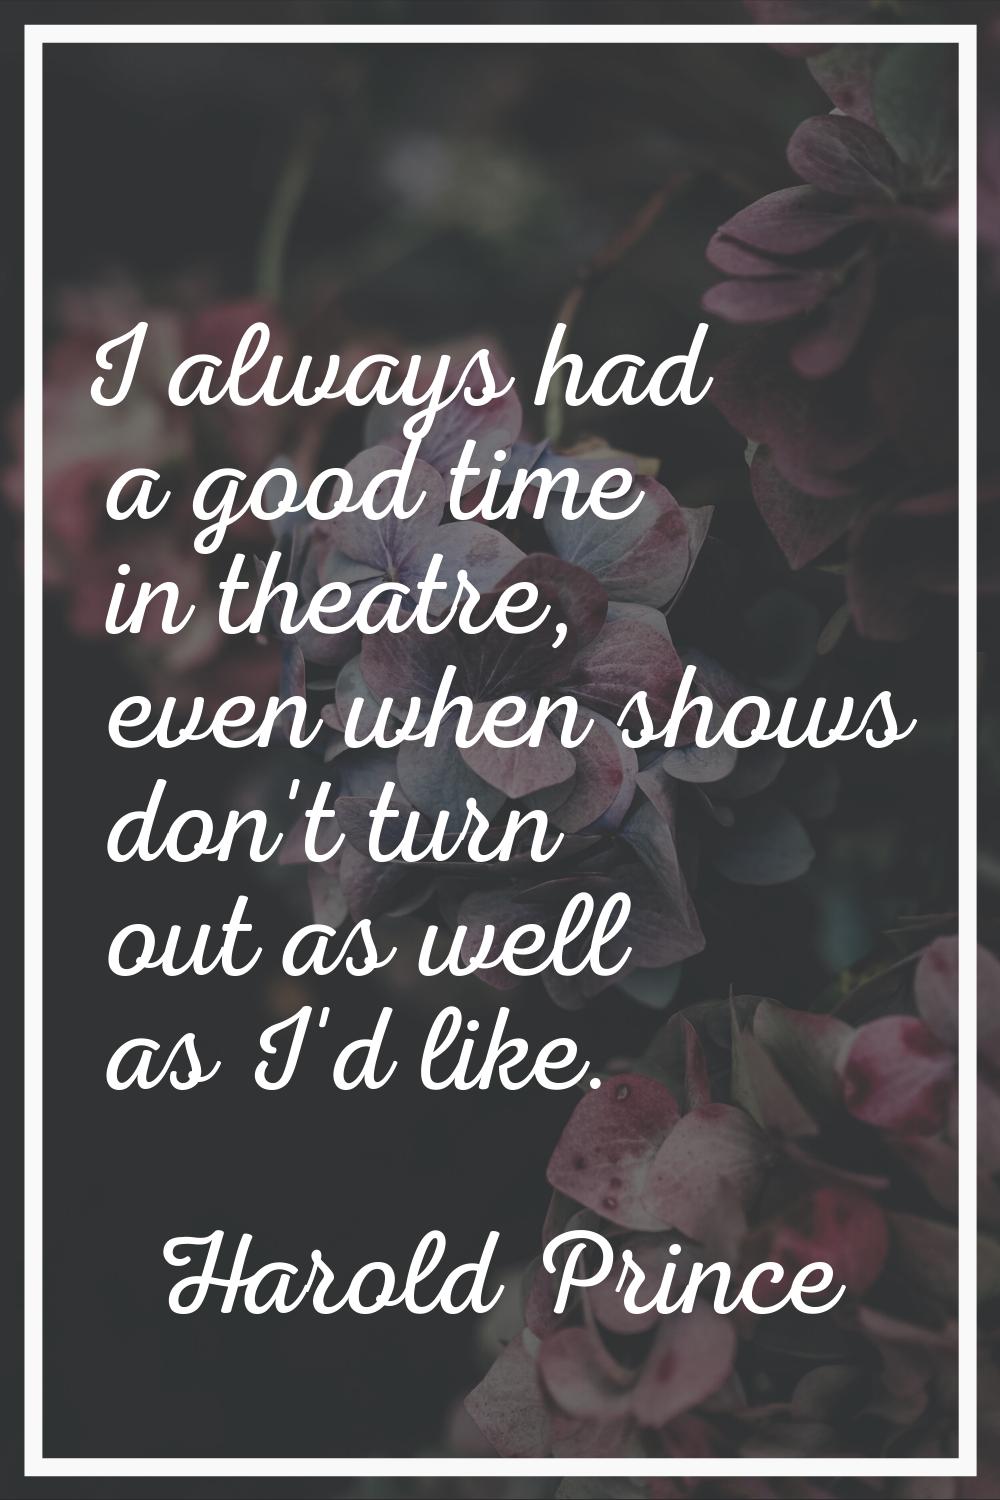 I always had a good time in theatre, even when shows don't turn out as well as I'd like.